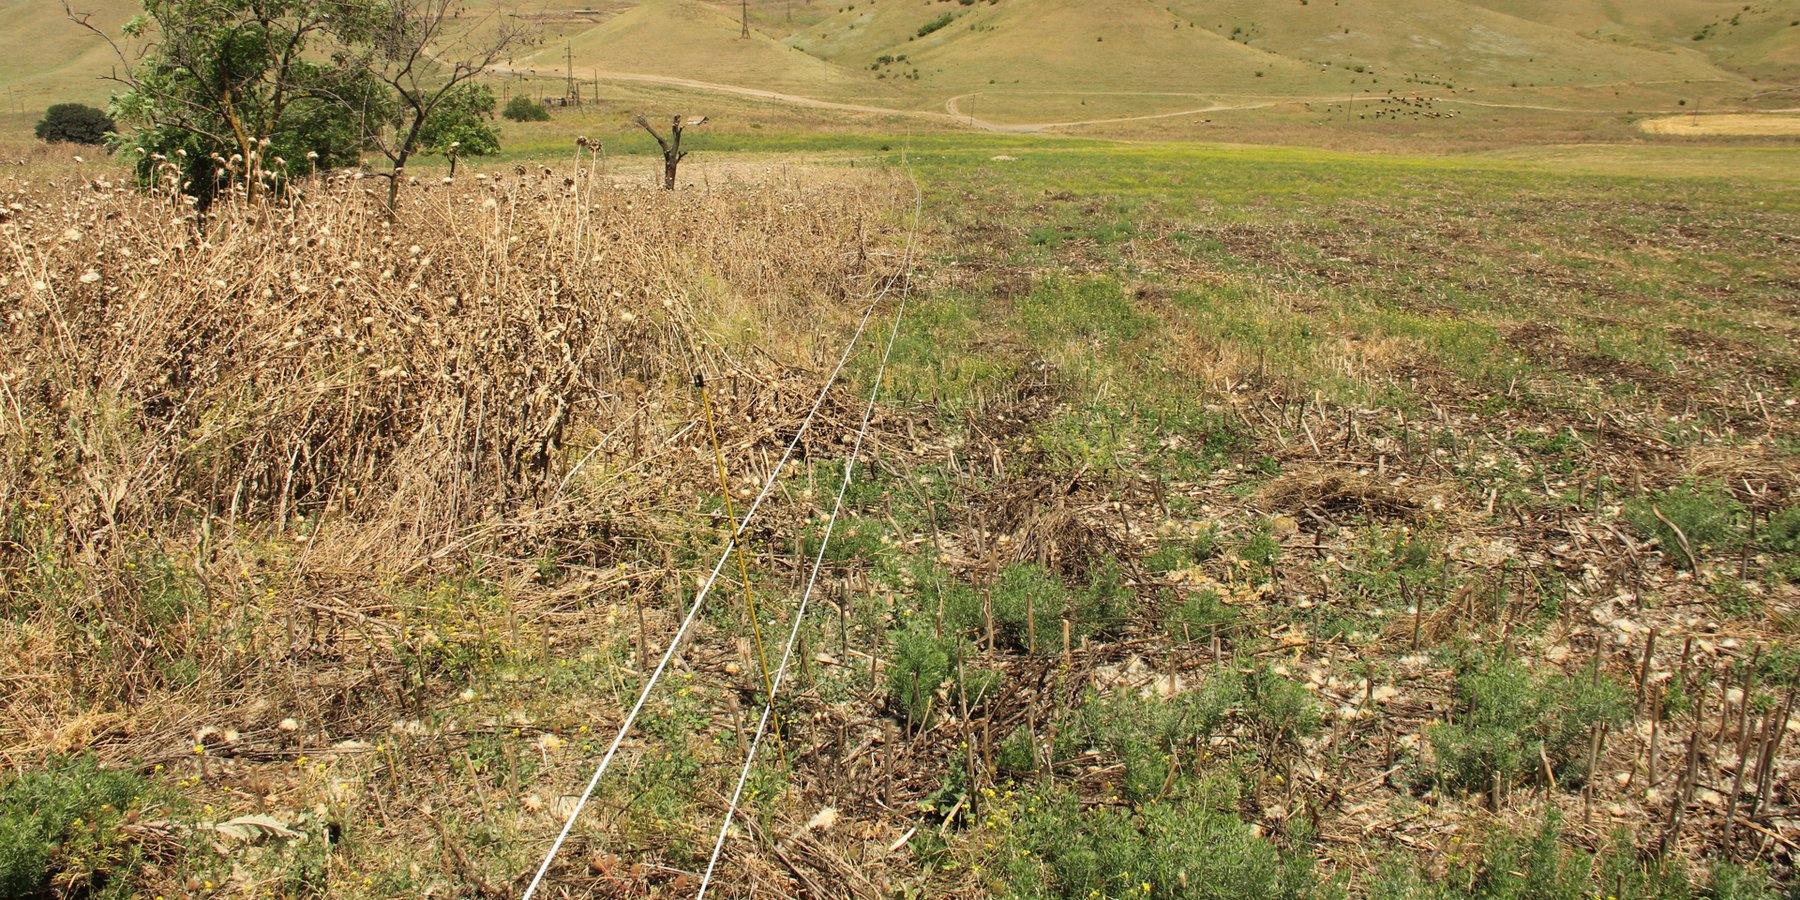 Regeneration of a degraded pastureland in Kasristskali that is part of a rotational grazing system (paddock system). Left side of the fence: degraded pastureland. Right side of the fence: managed paddock after the first mowing.